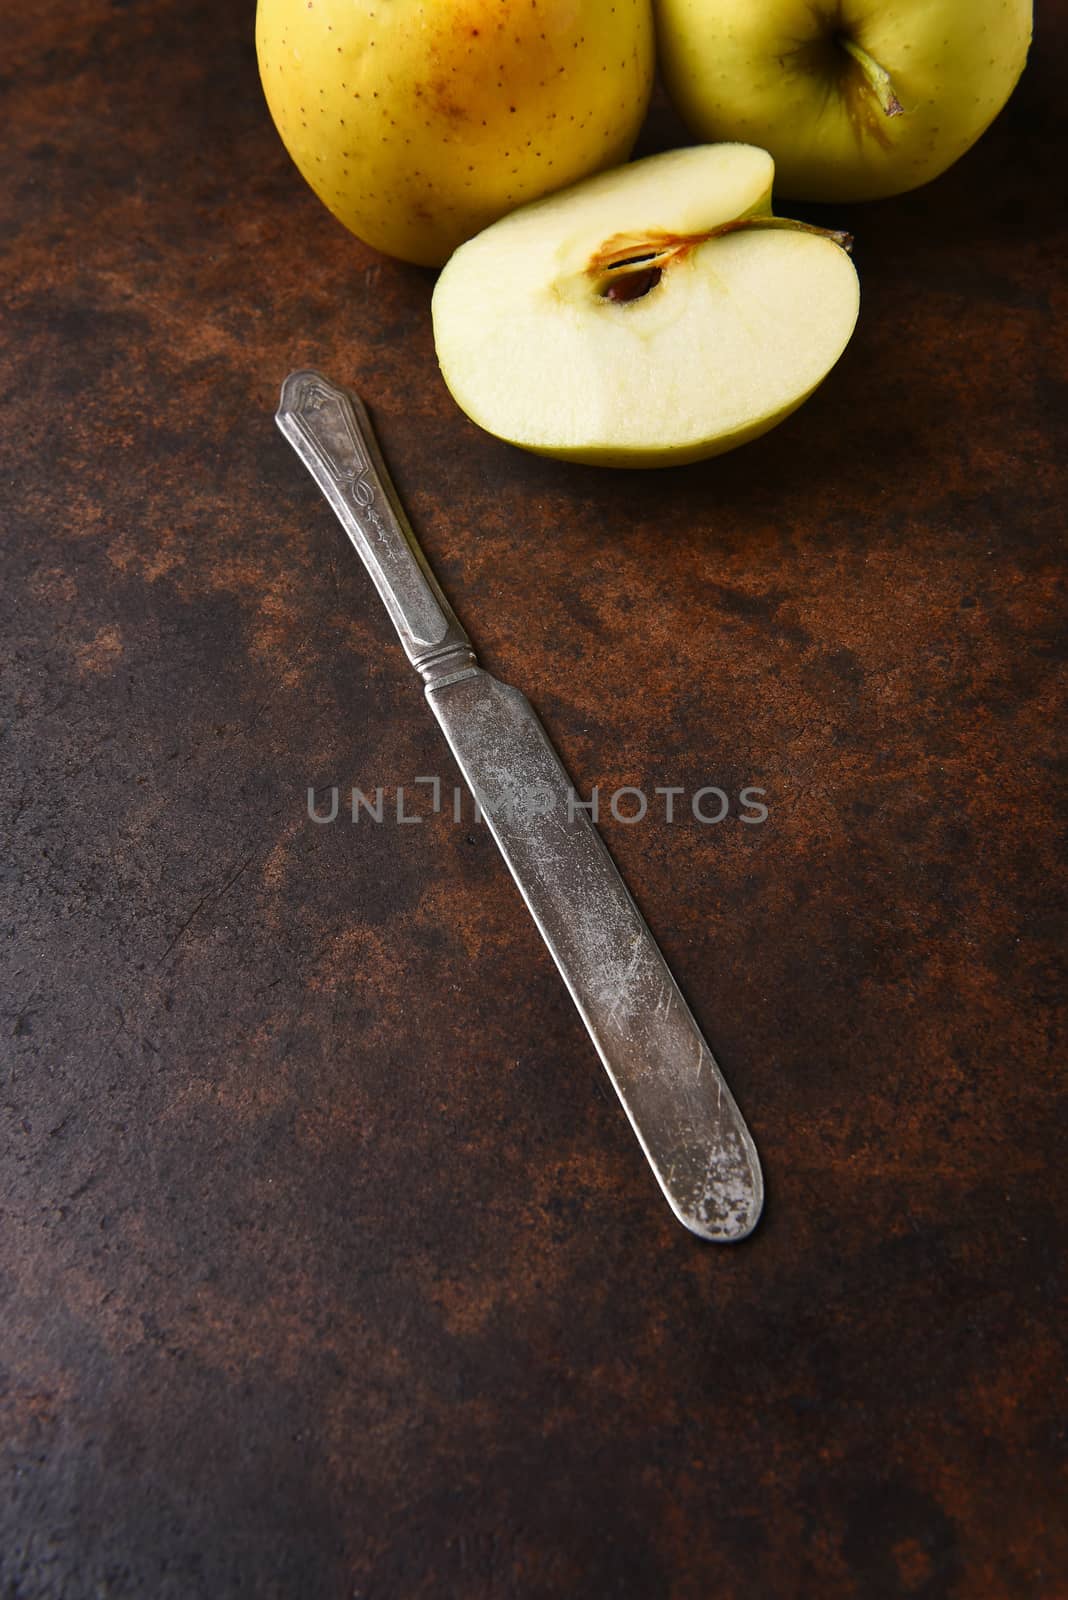 Closeup of an old knife with golden delicious apples in the background. Vertical format on a dark mottled surface.